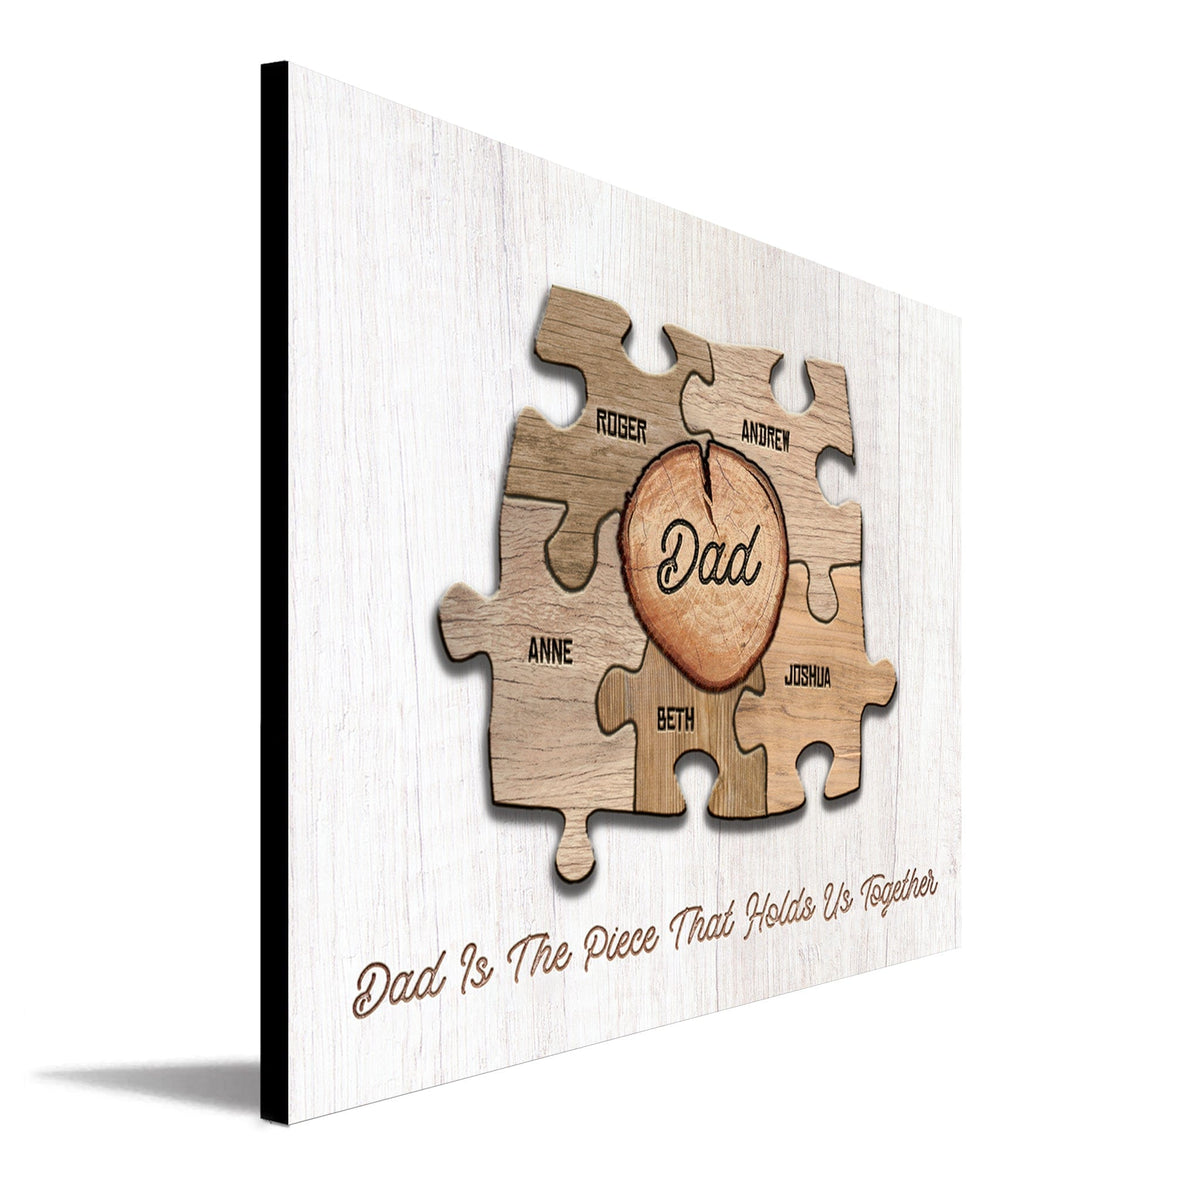 Dad is the piece that holds us together wood sign